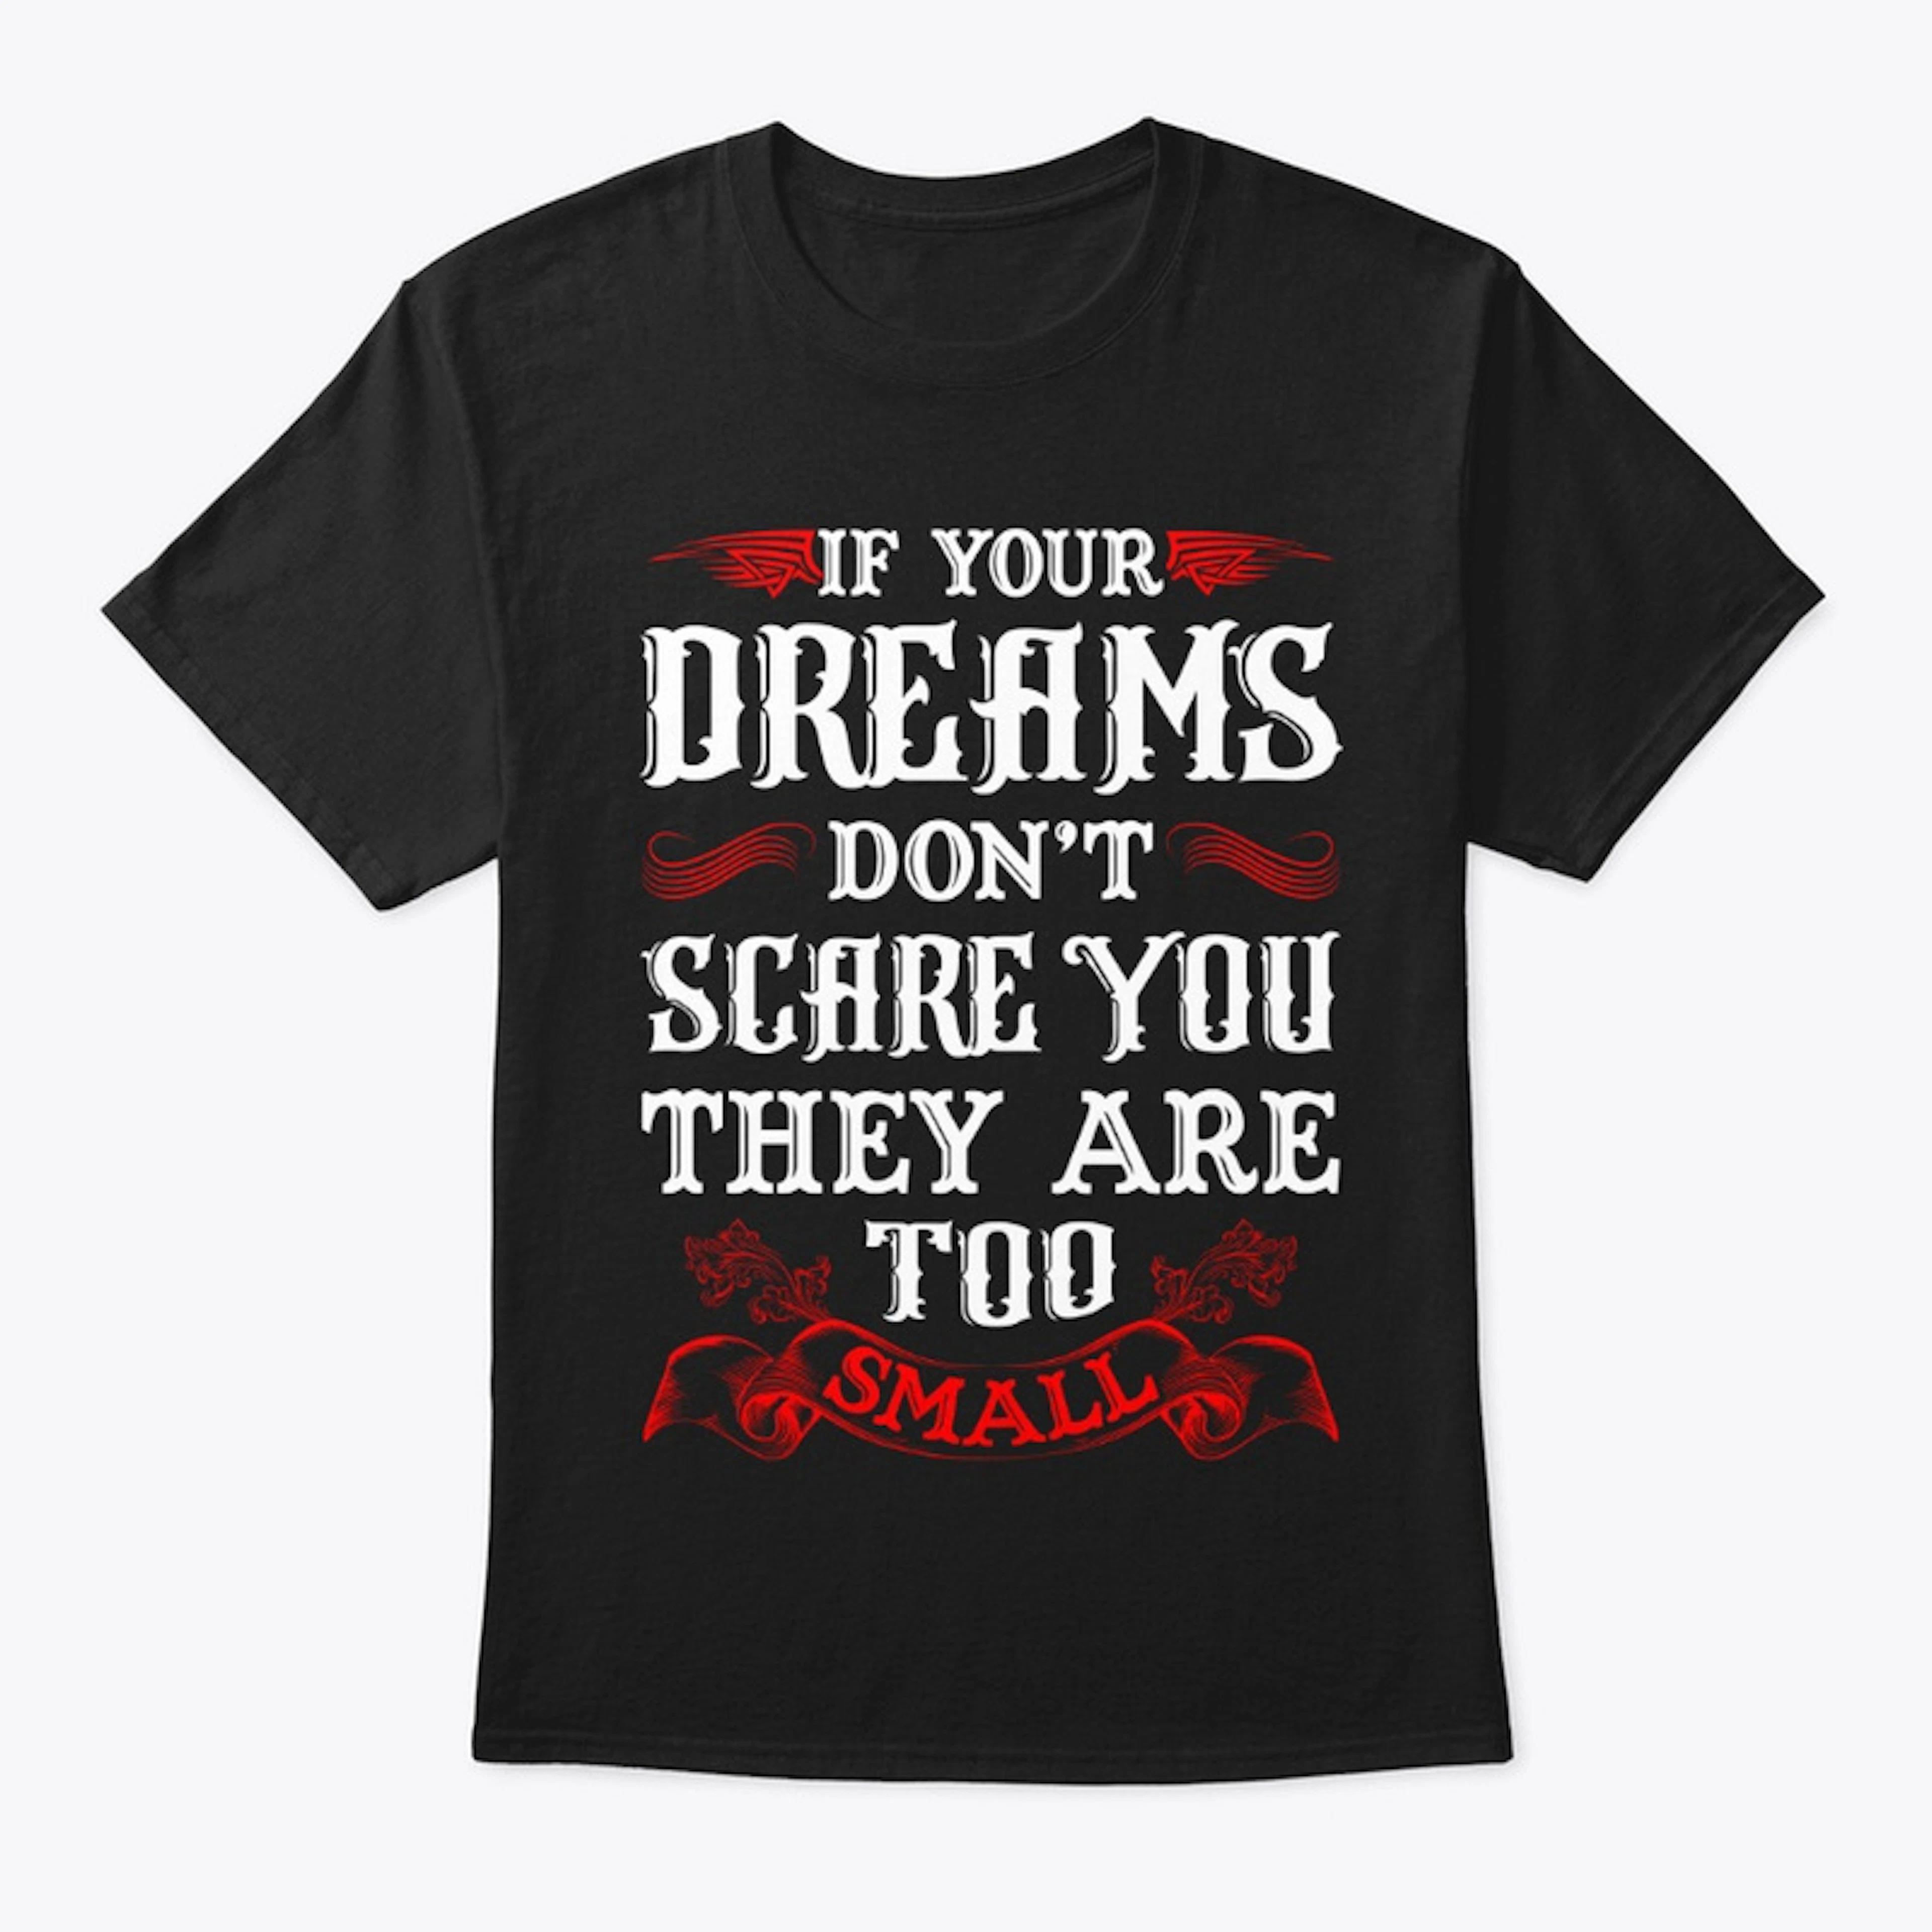 If your dreams don't scare you tee